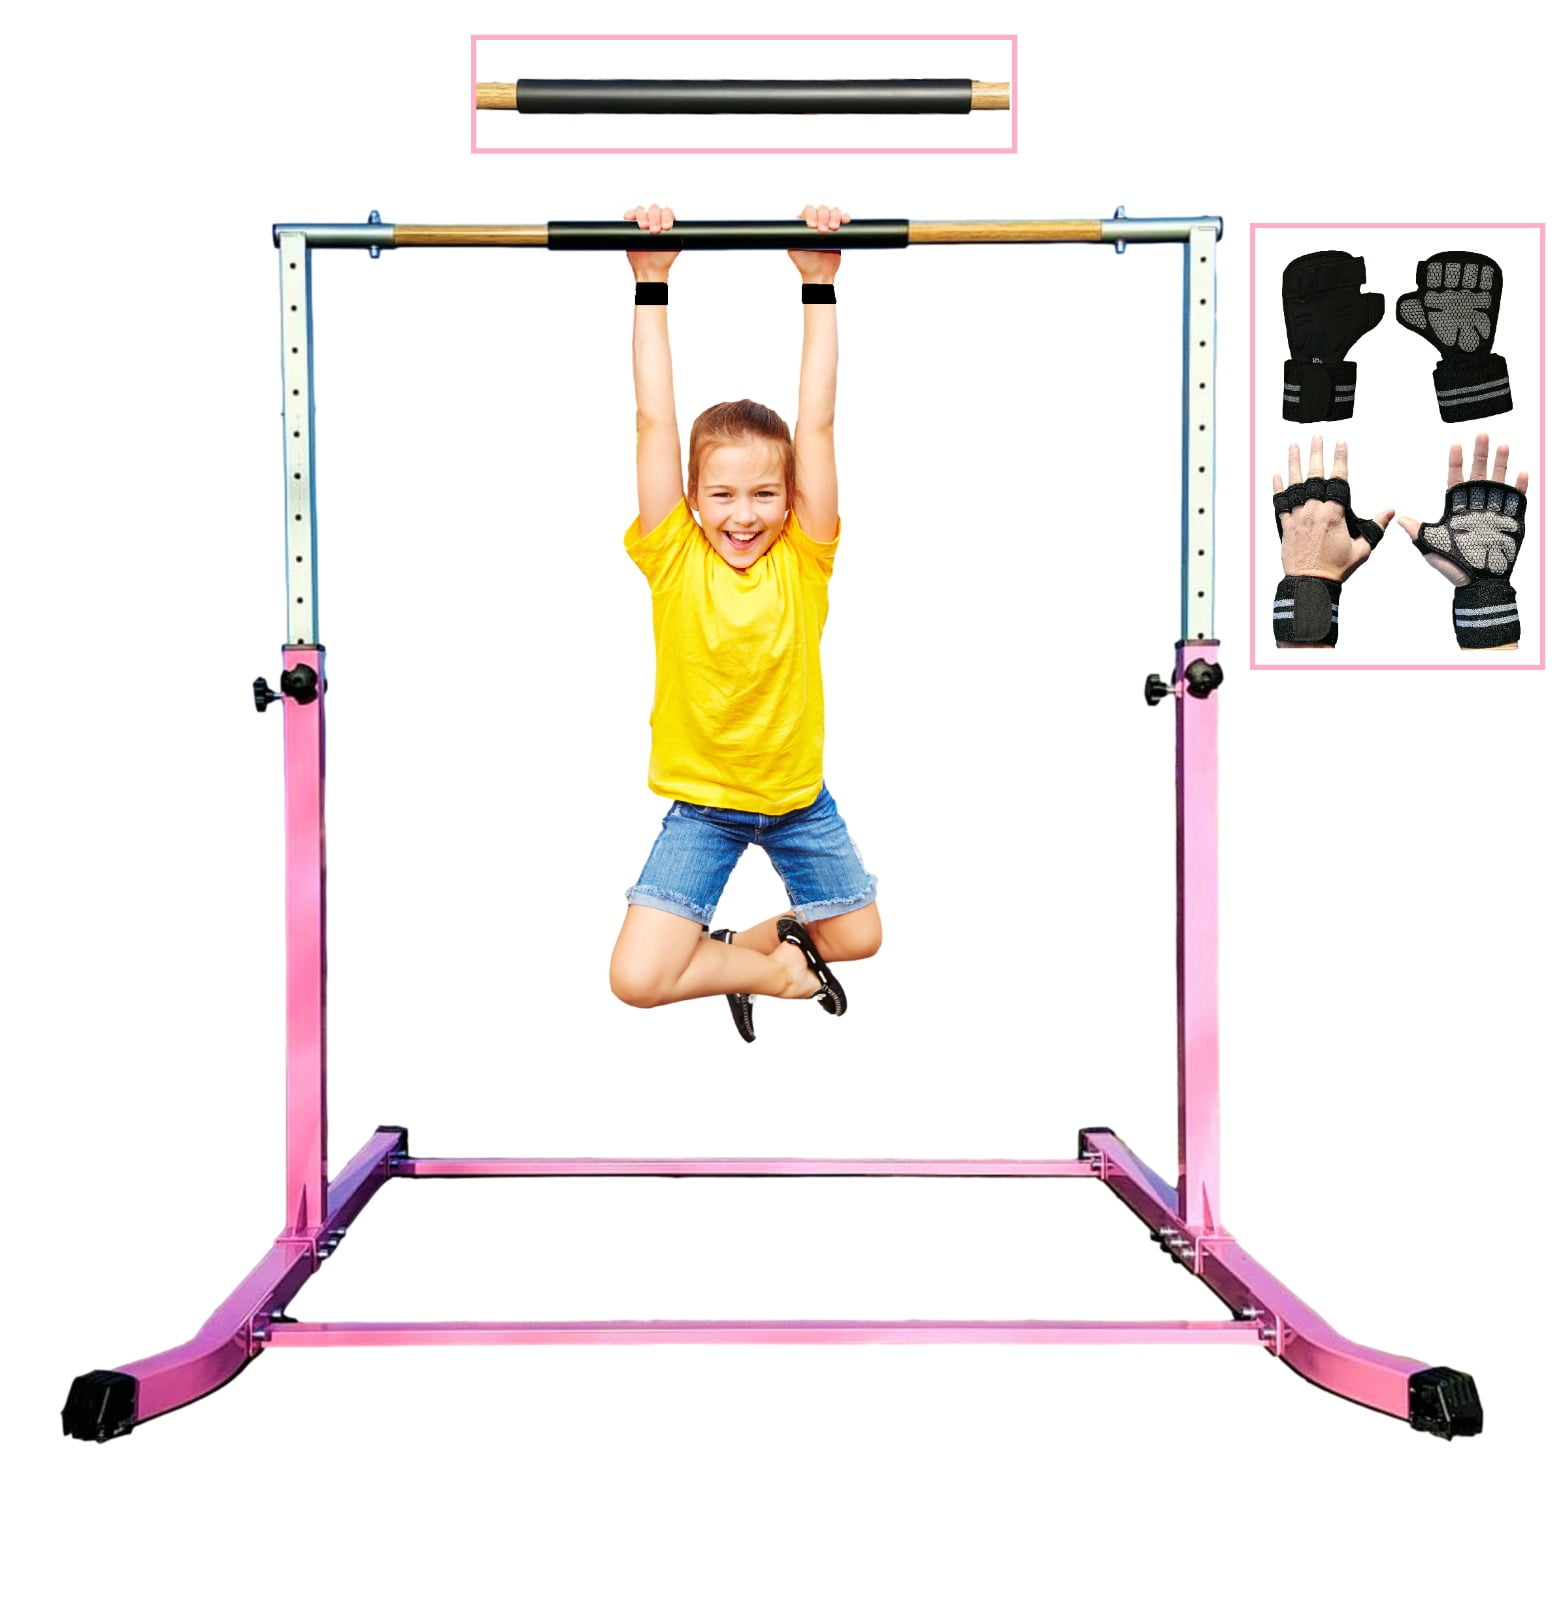 Gymnastic Horizontal Training Bar Kip Complete Set - Adjustable Height 3 FT to 5 FT - Kids Junior Gymnastics Training - Includes Bar Pad Cushion, Gymnastics and Heavy Duty Curved Legs - Walmart.com